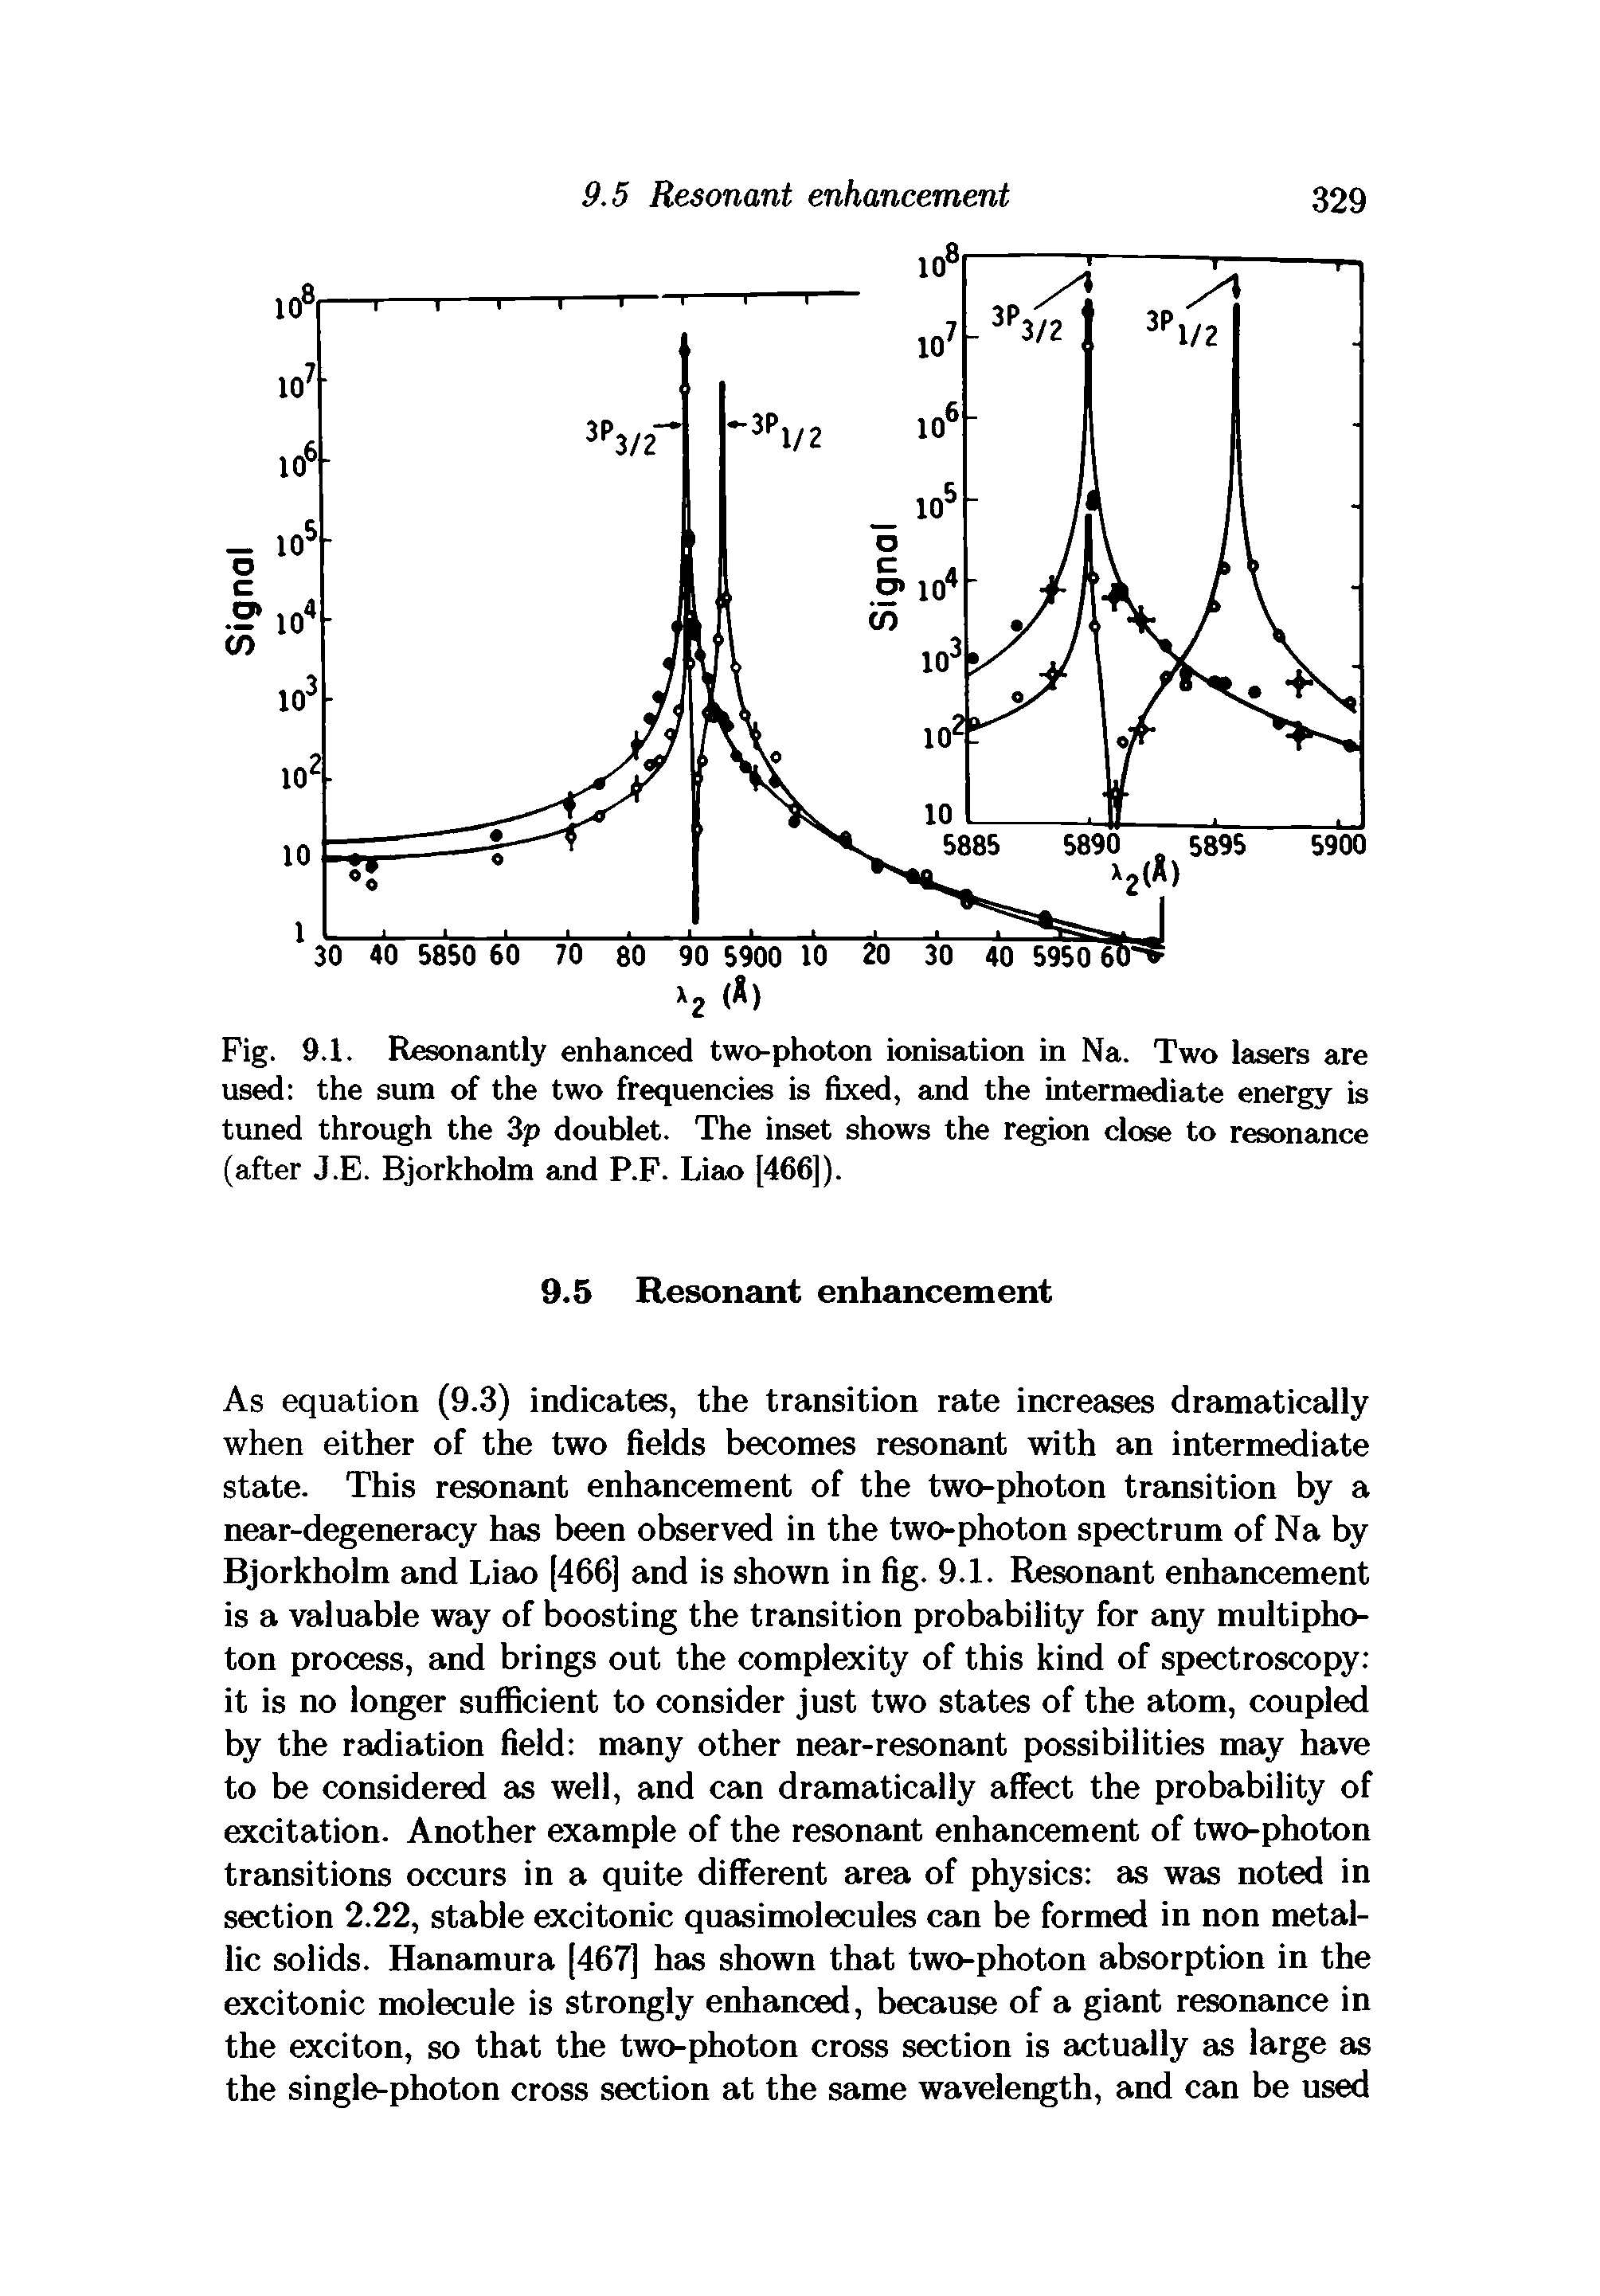 Fig. 9.1. Resonantly enhanced two-photon ionisation in Na. Two lasers are used the sum of the two frequencies is fixed, and the intermediate energy is tuned through the 3p doublet. The inset shows the region close to resonance (after J.E. Bjorkholm and P.F. Liao [466]).